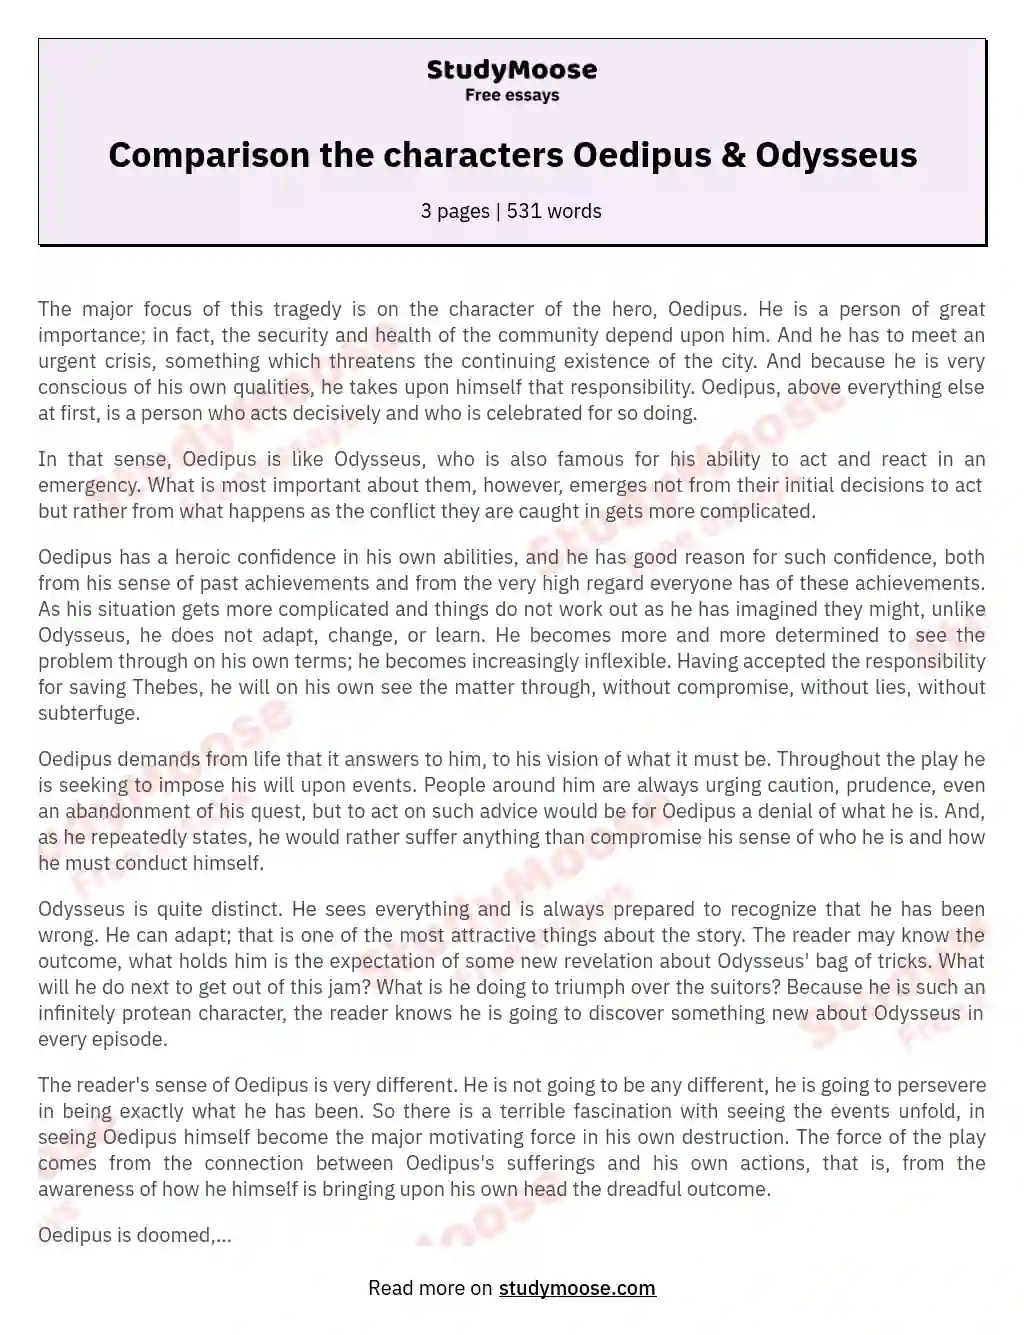 Comparison the characters Oedipus & Odysseus essay